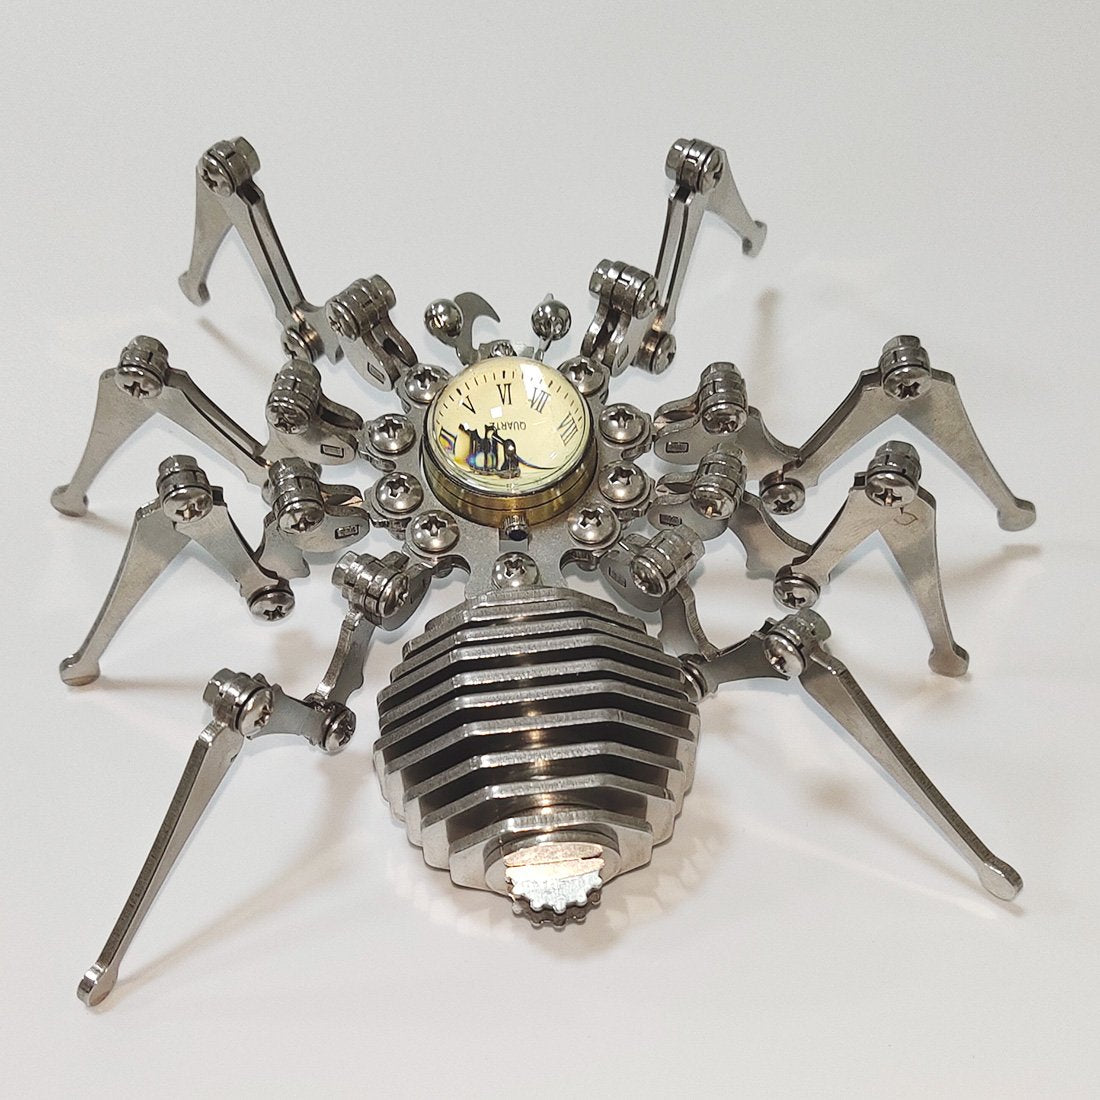 Punk Style 3D Metal Assembled Spider Wall Clock Model  for Home Decor